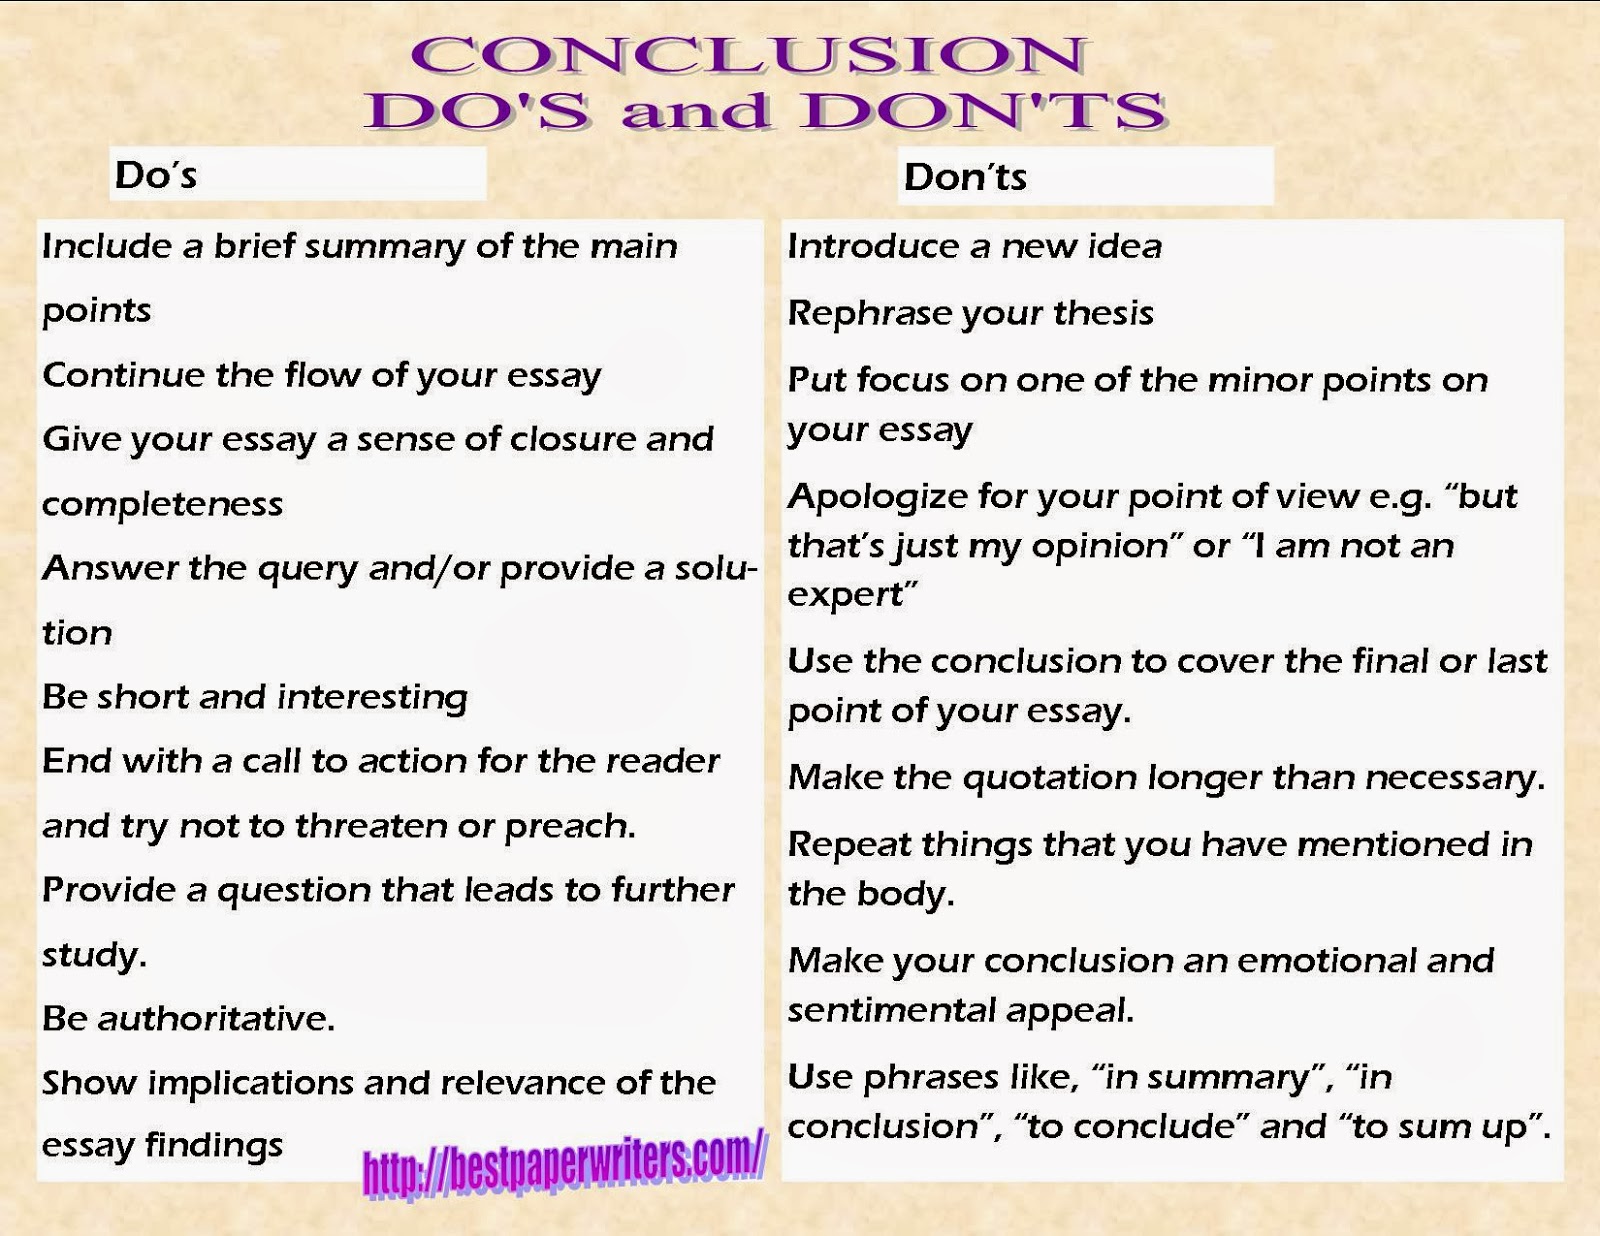 How to write a conclusion paragraph for a critical essay